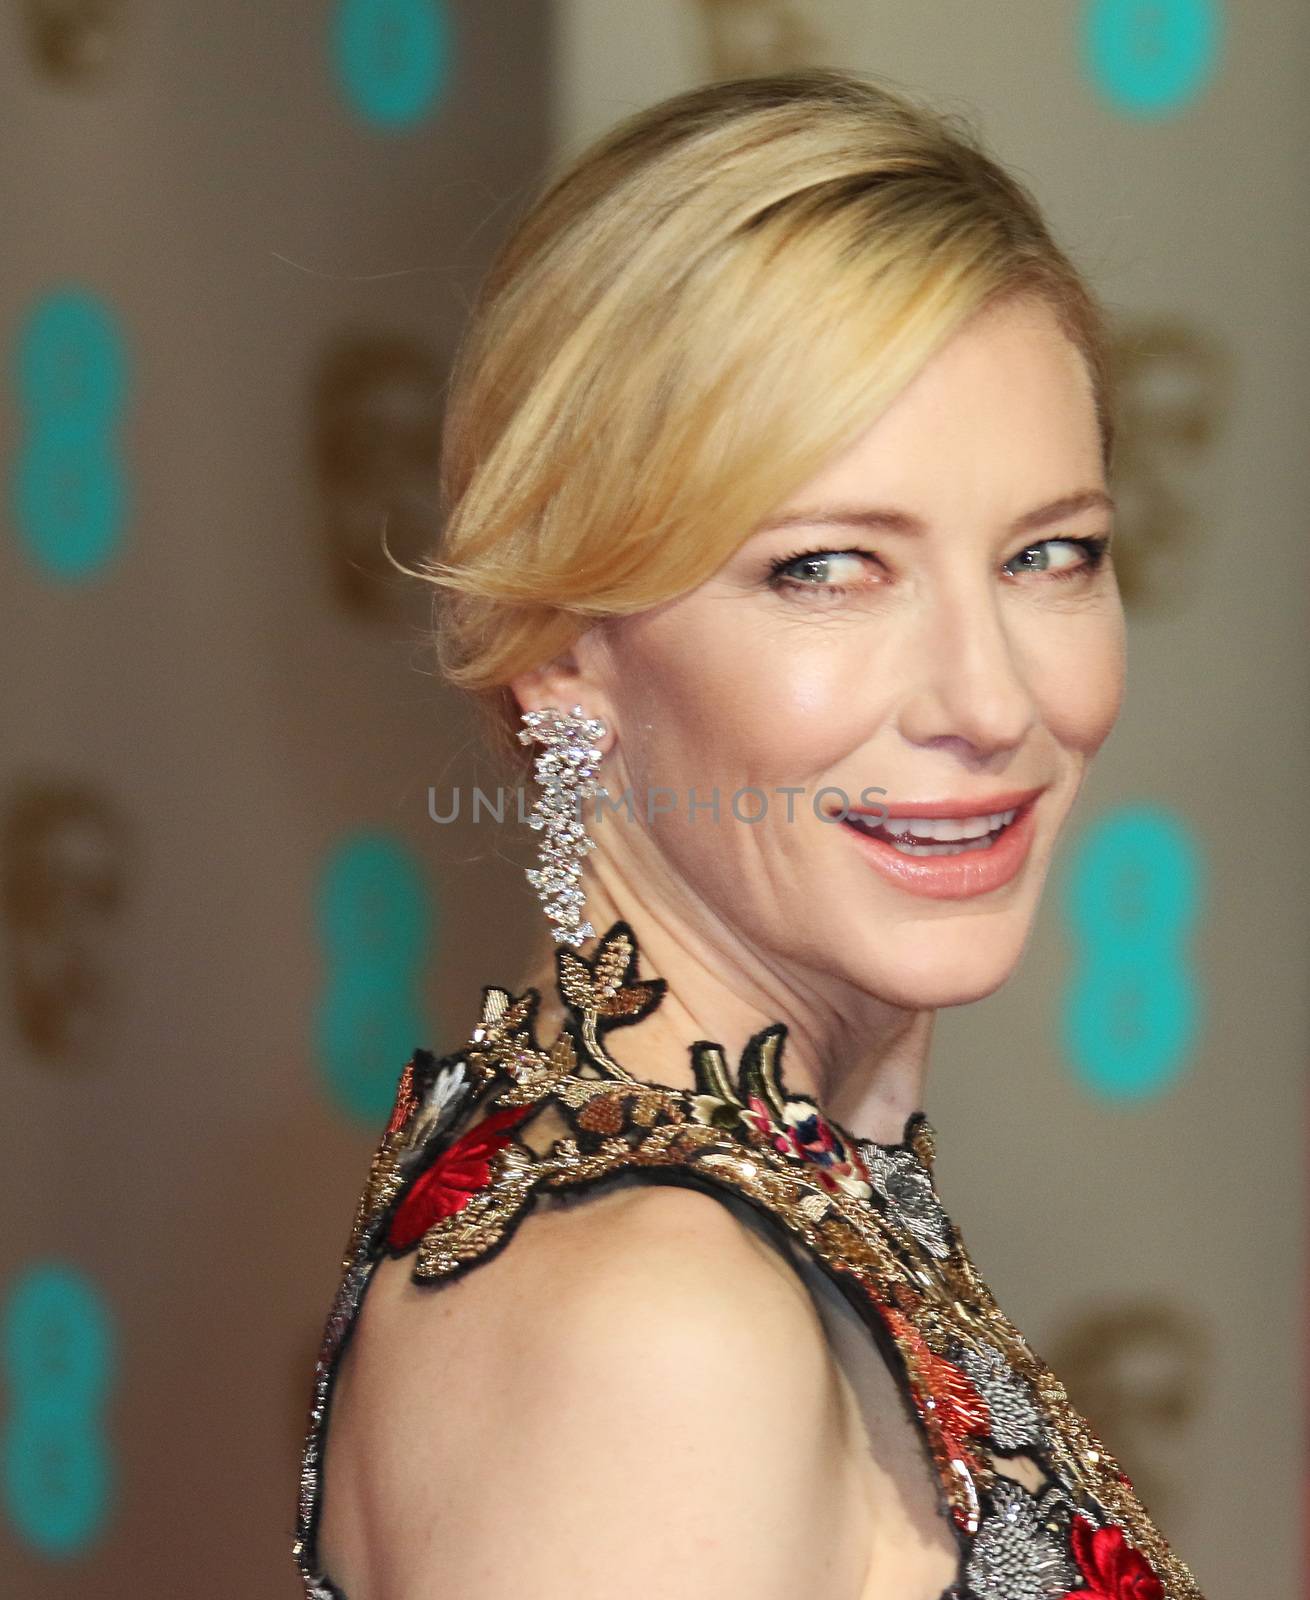 UK, London: Australian actress Cate Blanchett poses on the red Carpet at the EE British Academy Film Awards, BAFTA Awards, at the Royal Opera House in London, England, on 14 February 2016.